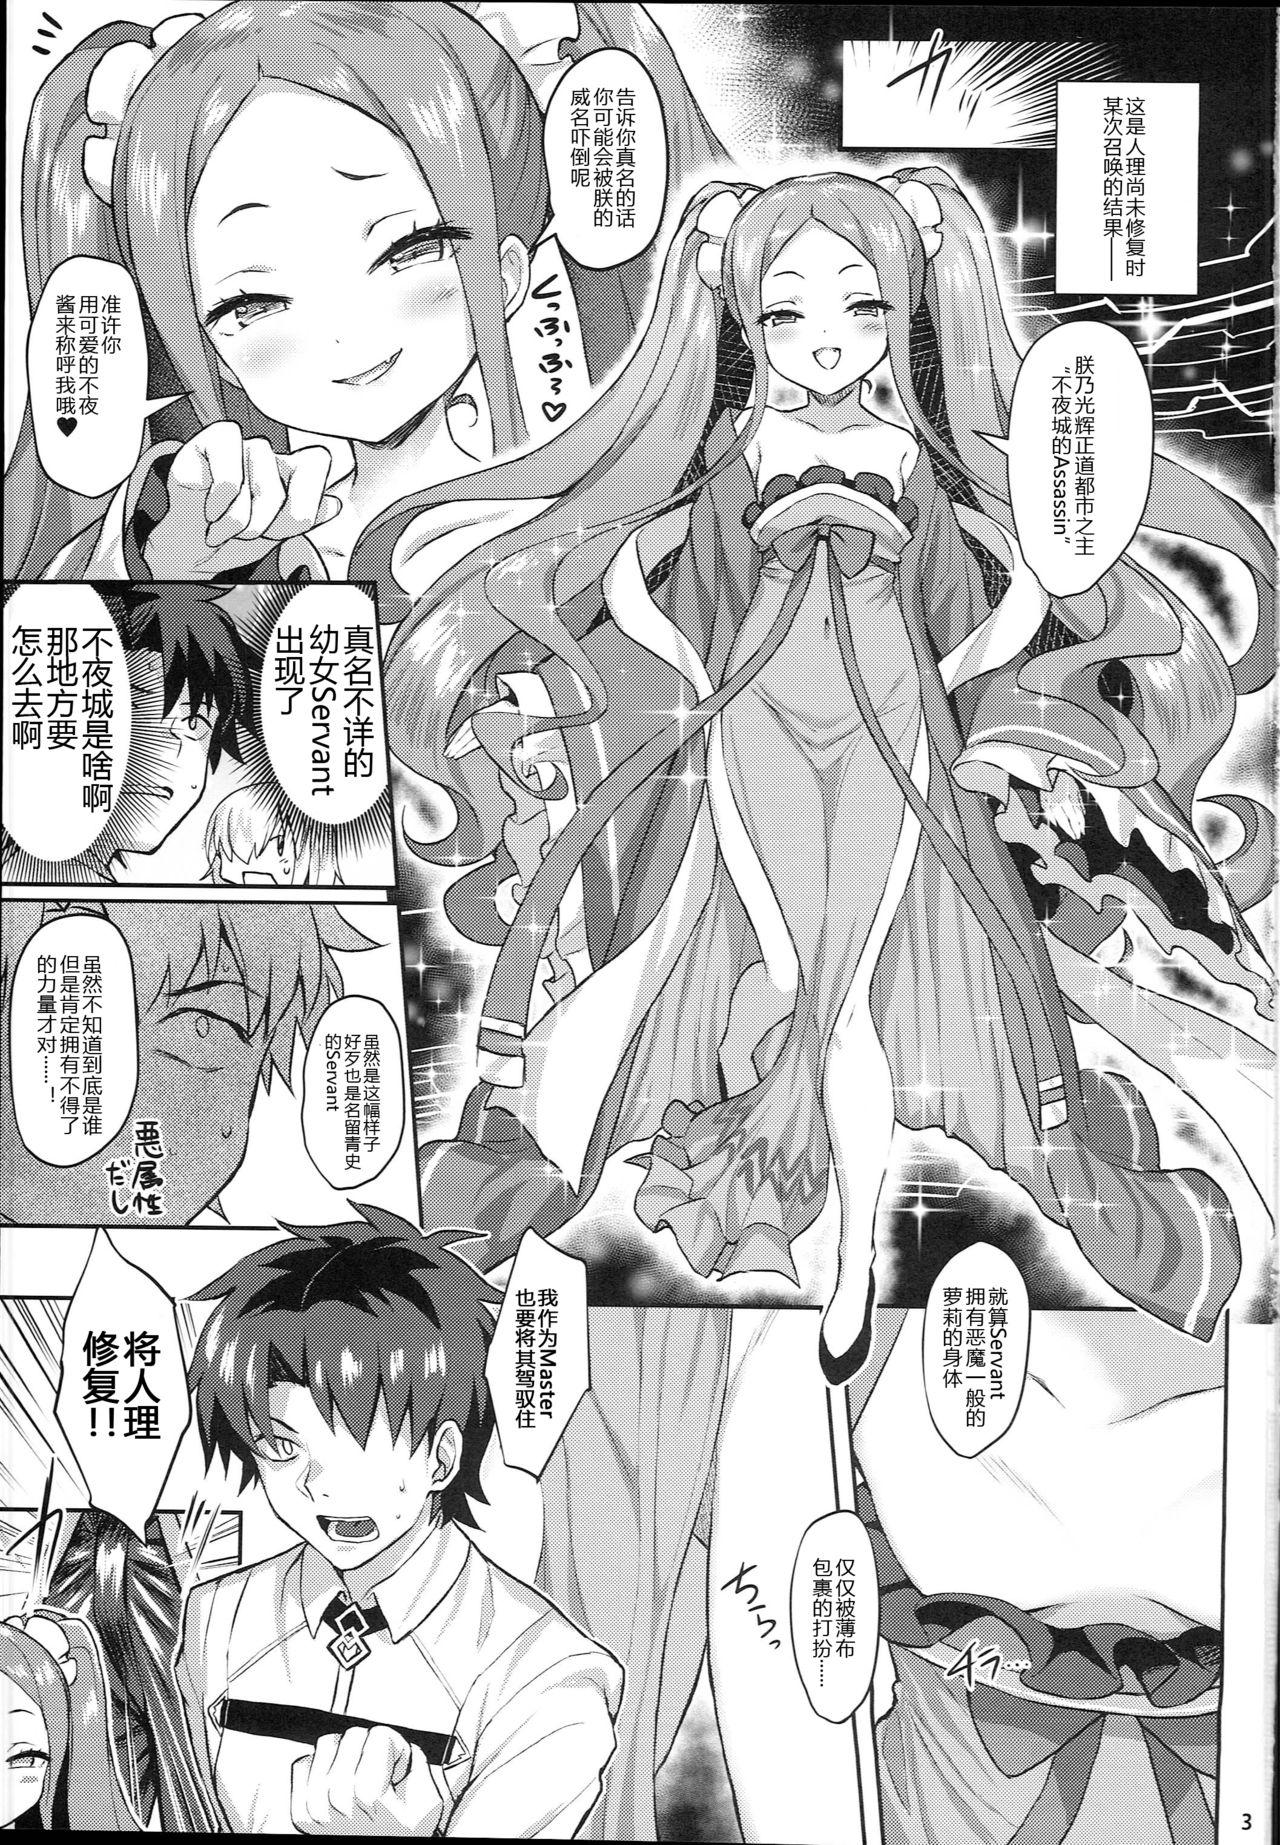 Horny Slut Fuya Syndrome - Sleepless Syndrome - Fate grand order Culona - Page 4